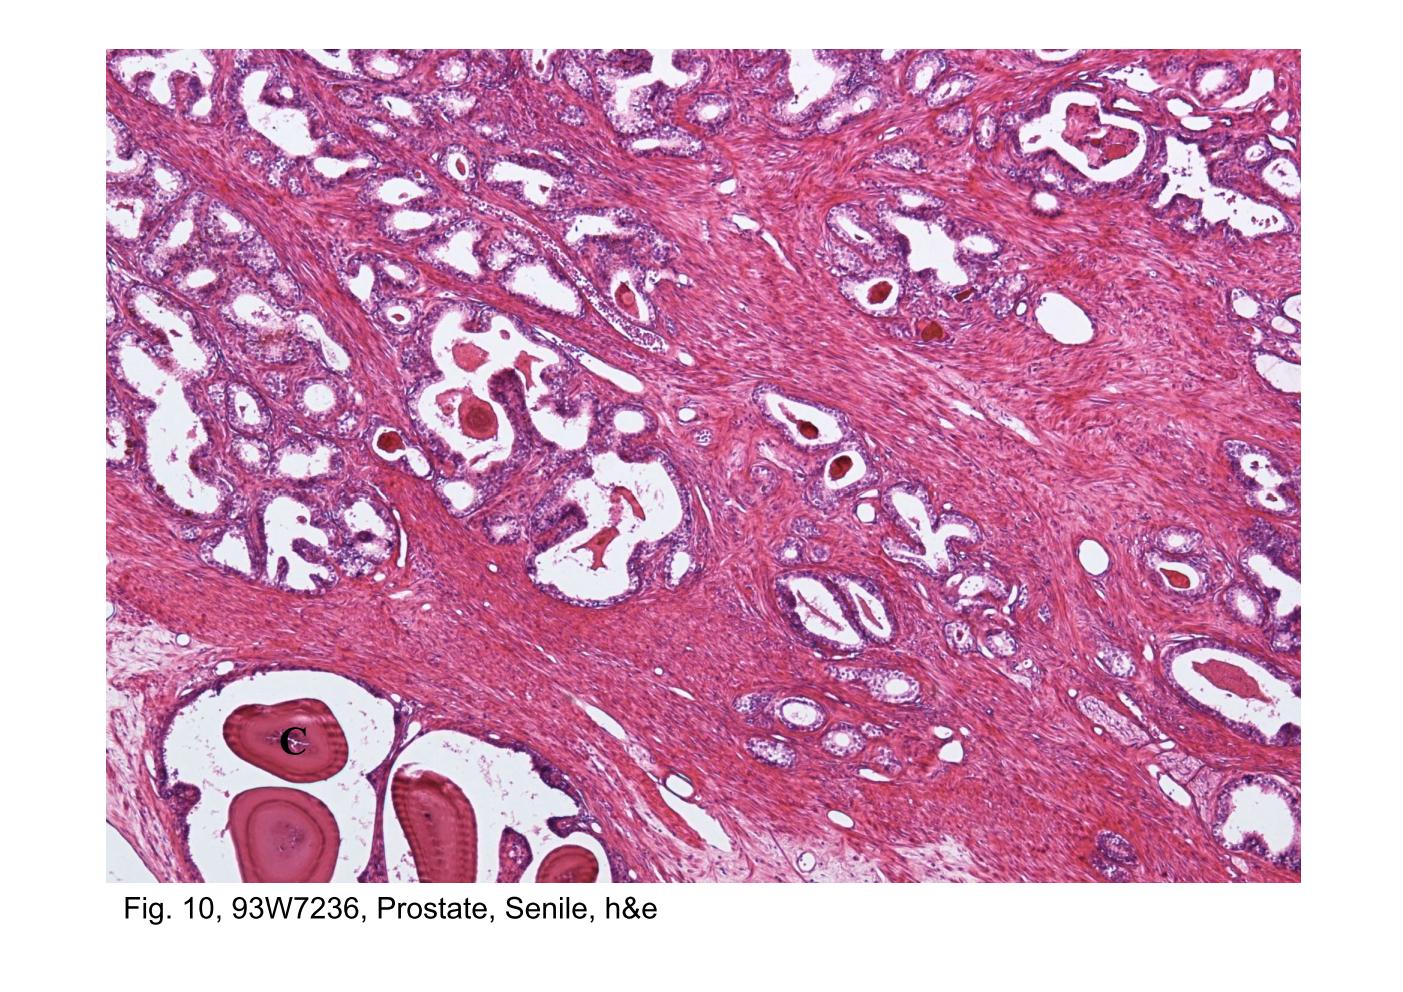 block14_19.jpg - Fig. 10, 93W7236, Prostate, Senile, h&eA portion of the prostate gland is shown in this low-magnification  micrograph. The field is filled with the glandular and stromal  components of the prostate gland. The secretory tubuloalveoli of  the prostate gland vary greatly in form. They may appear as tubes,  as isolated alveoli, as alveoli with branches, or as tubes with  branches. The aggregations of dead epithelial cells and precipitated  secretions form prostatic concretions (C) in the lumina of the  alveoli; these gradually increase in number and size with age. The  concretions is eosinophilic and may have a concentric lamellar  appearance.